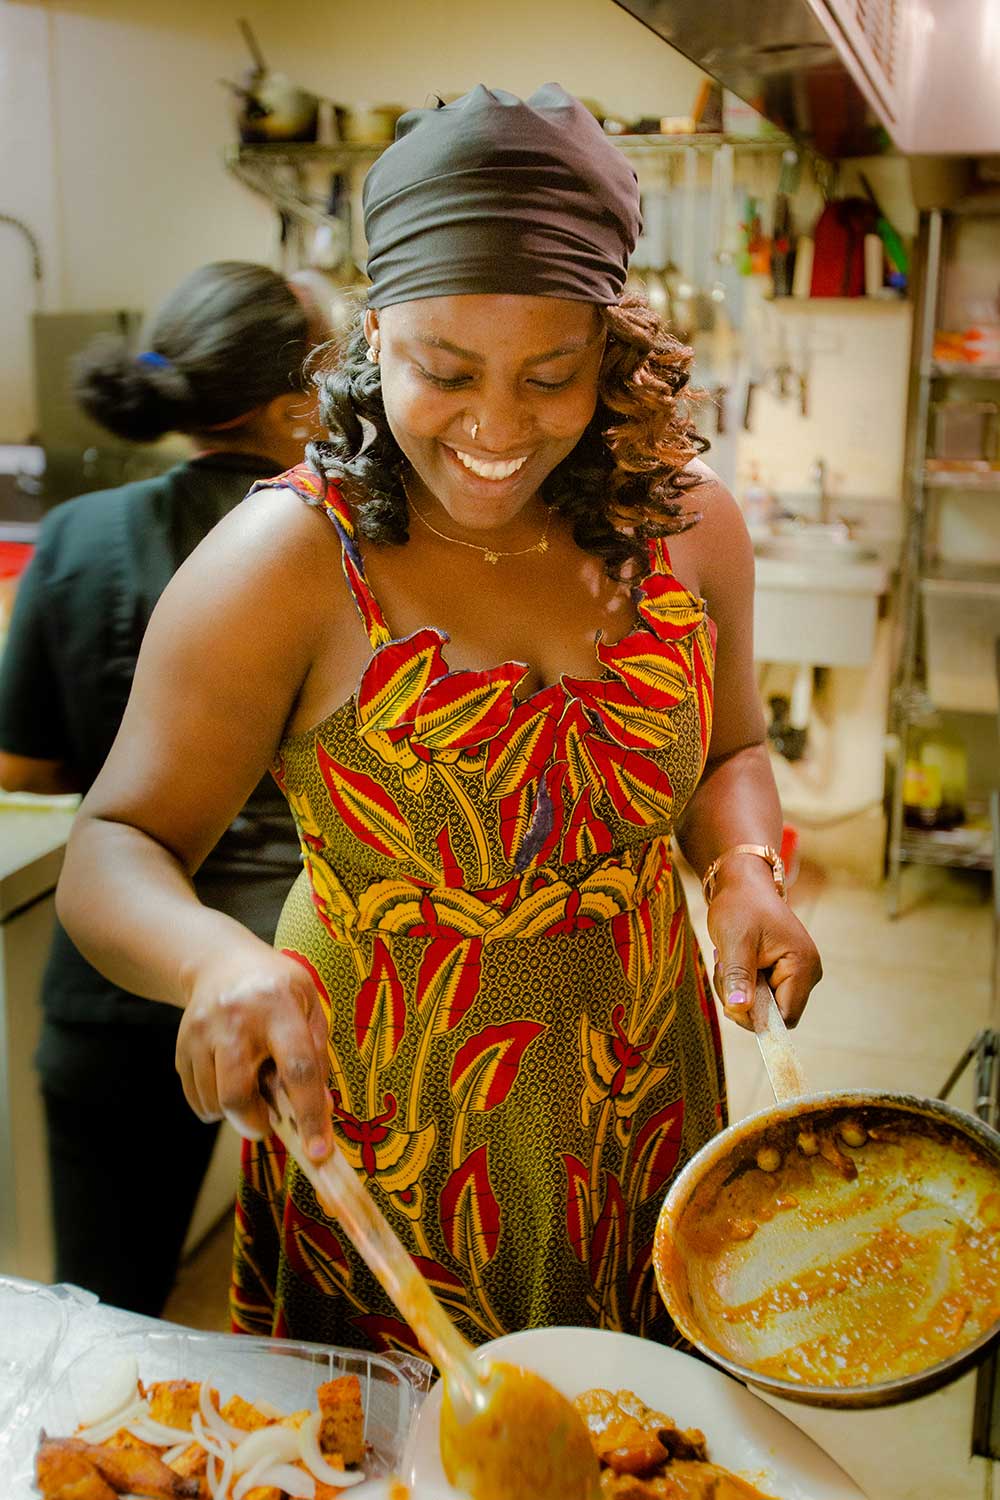 A woman smiling and serving food